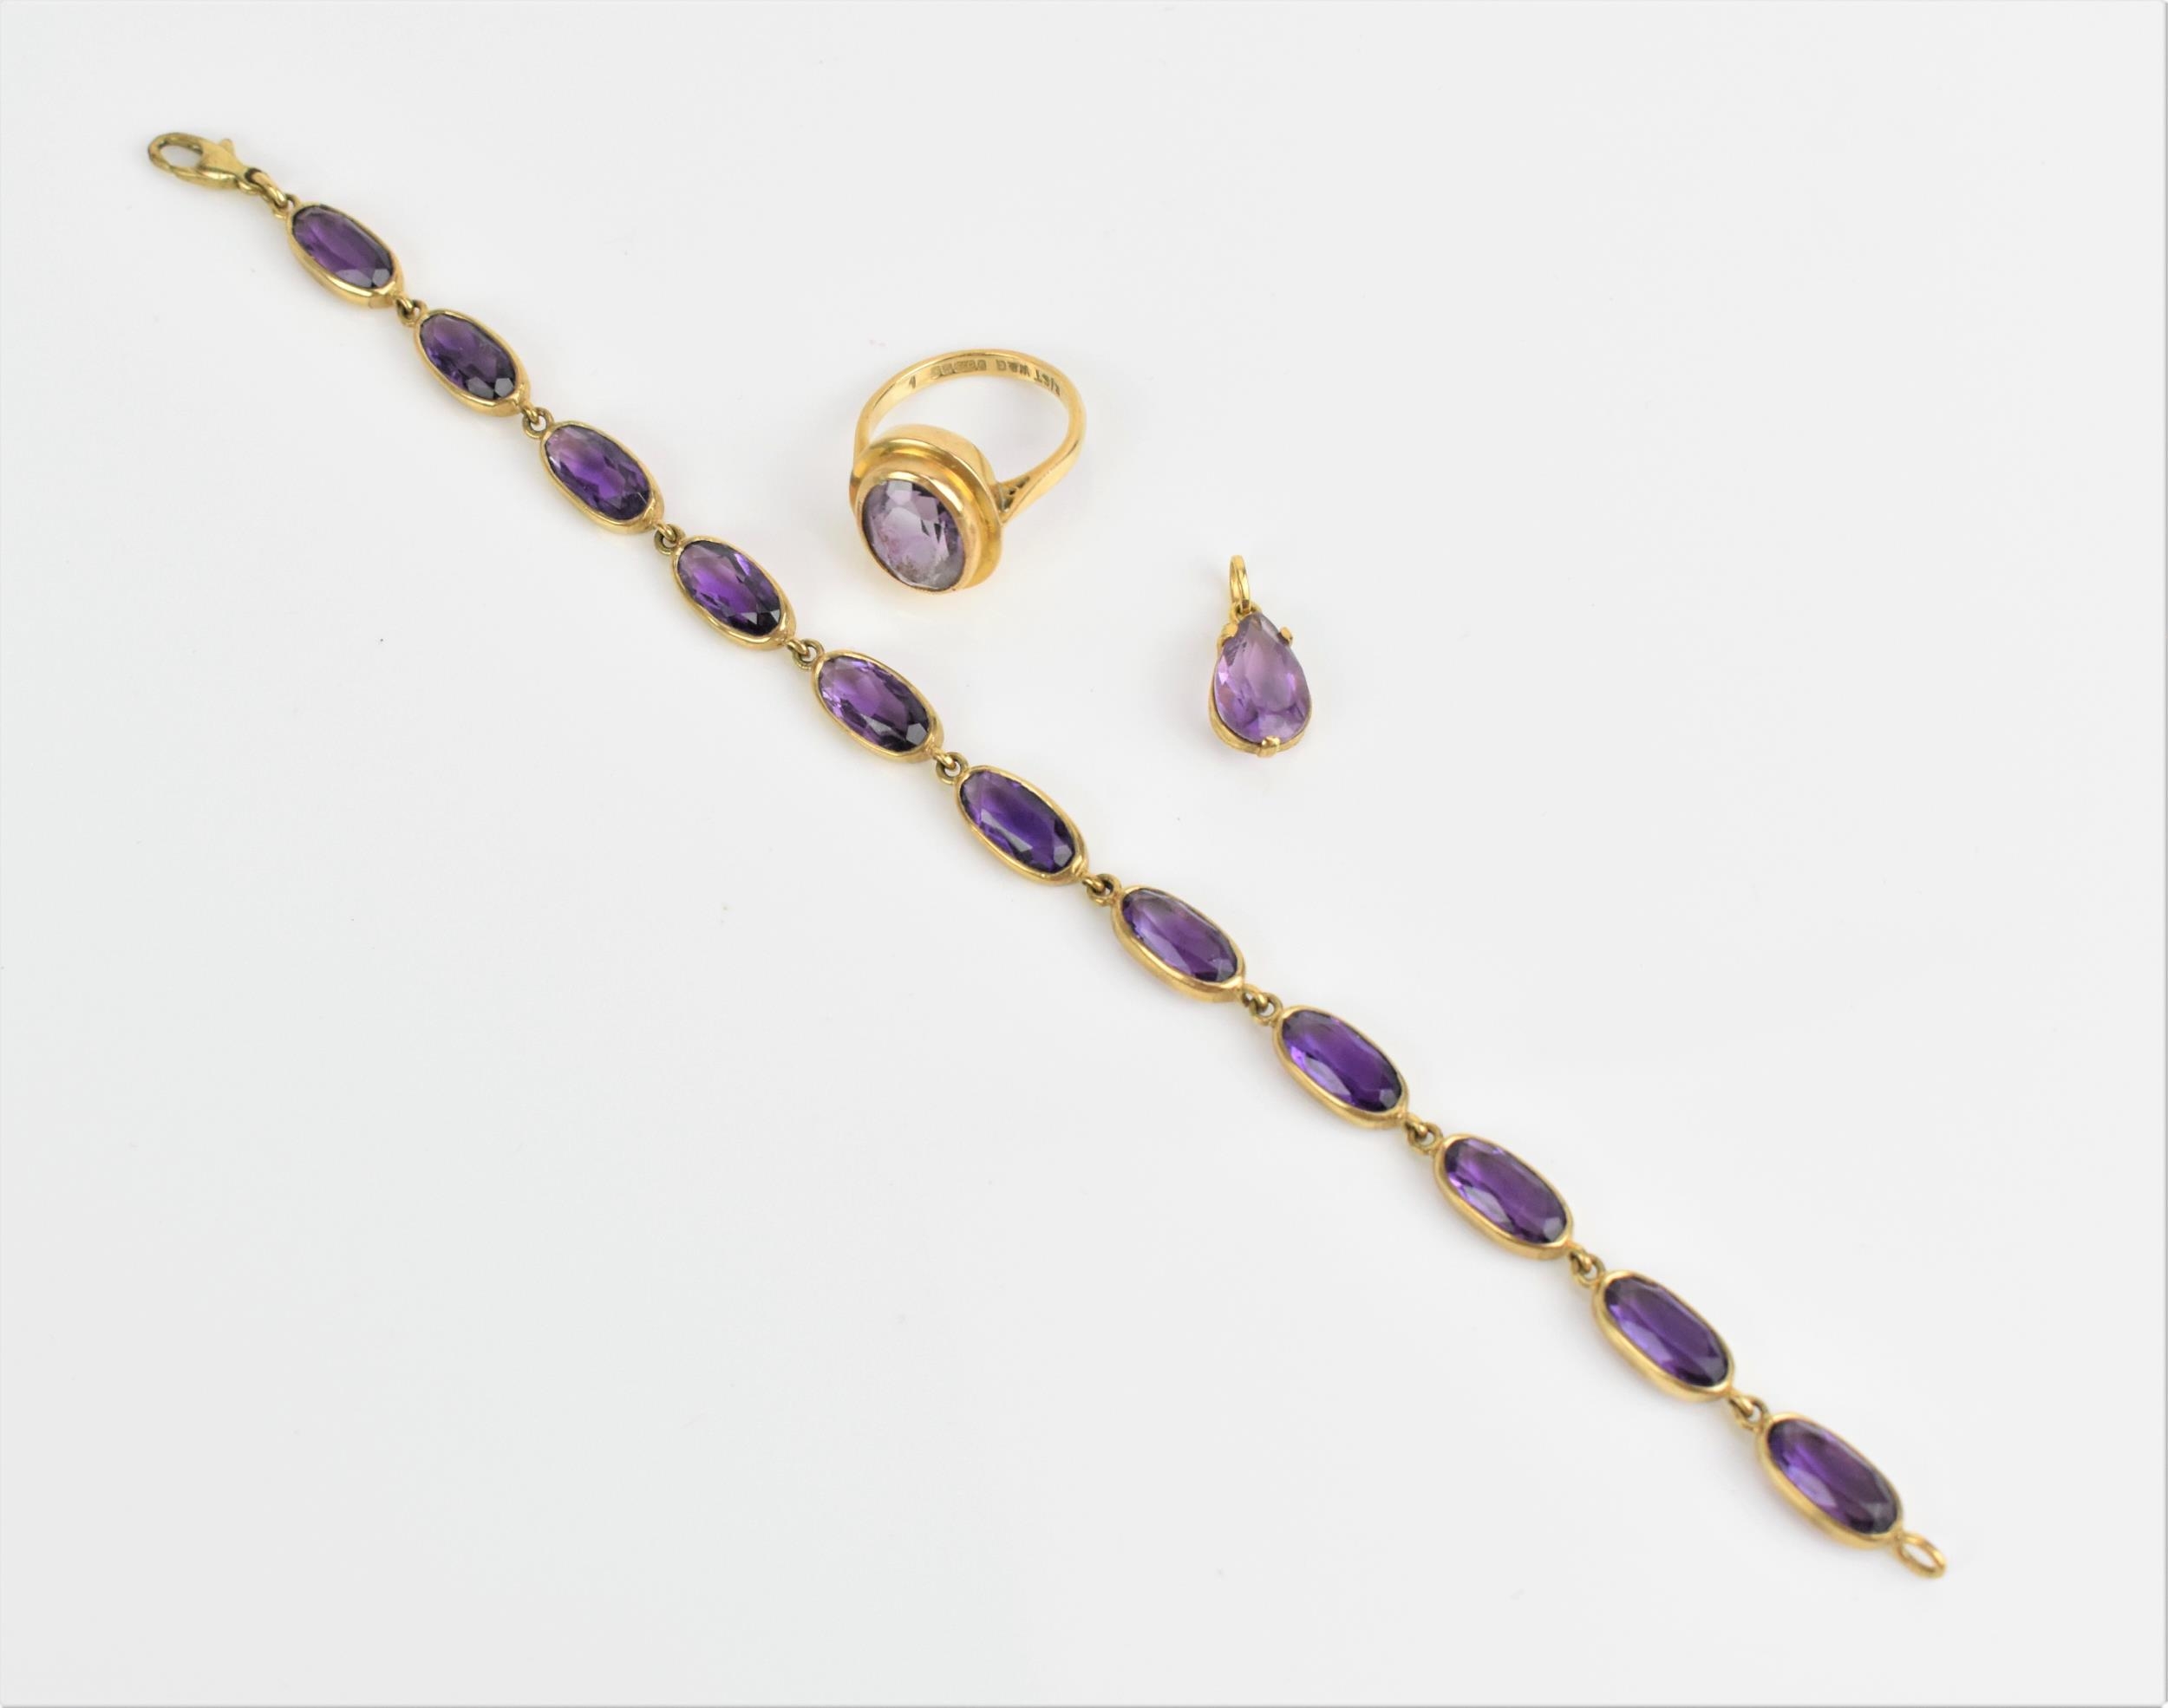 A 9ct yellow gold and amethyst bracelet, the stones in spectacle setting, linked with hoops and